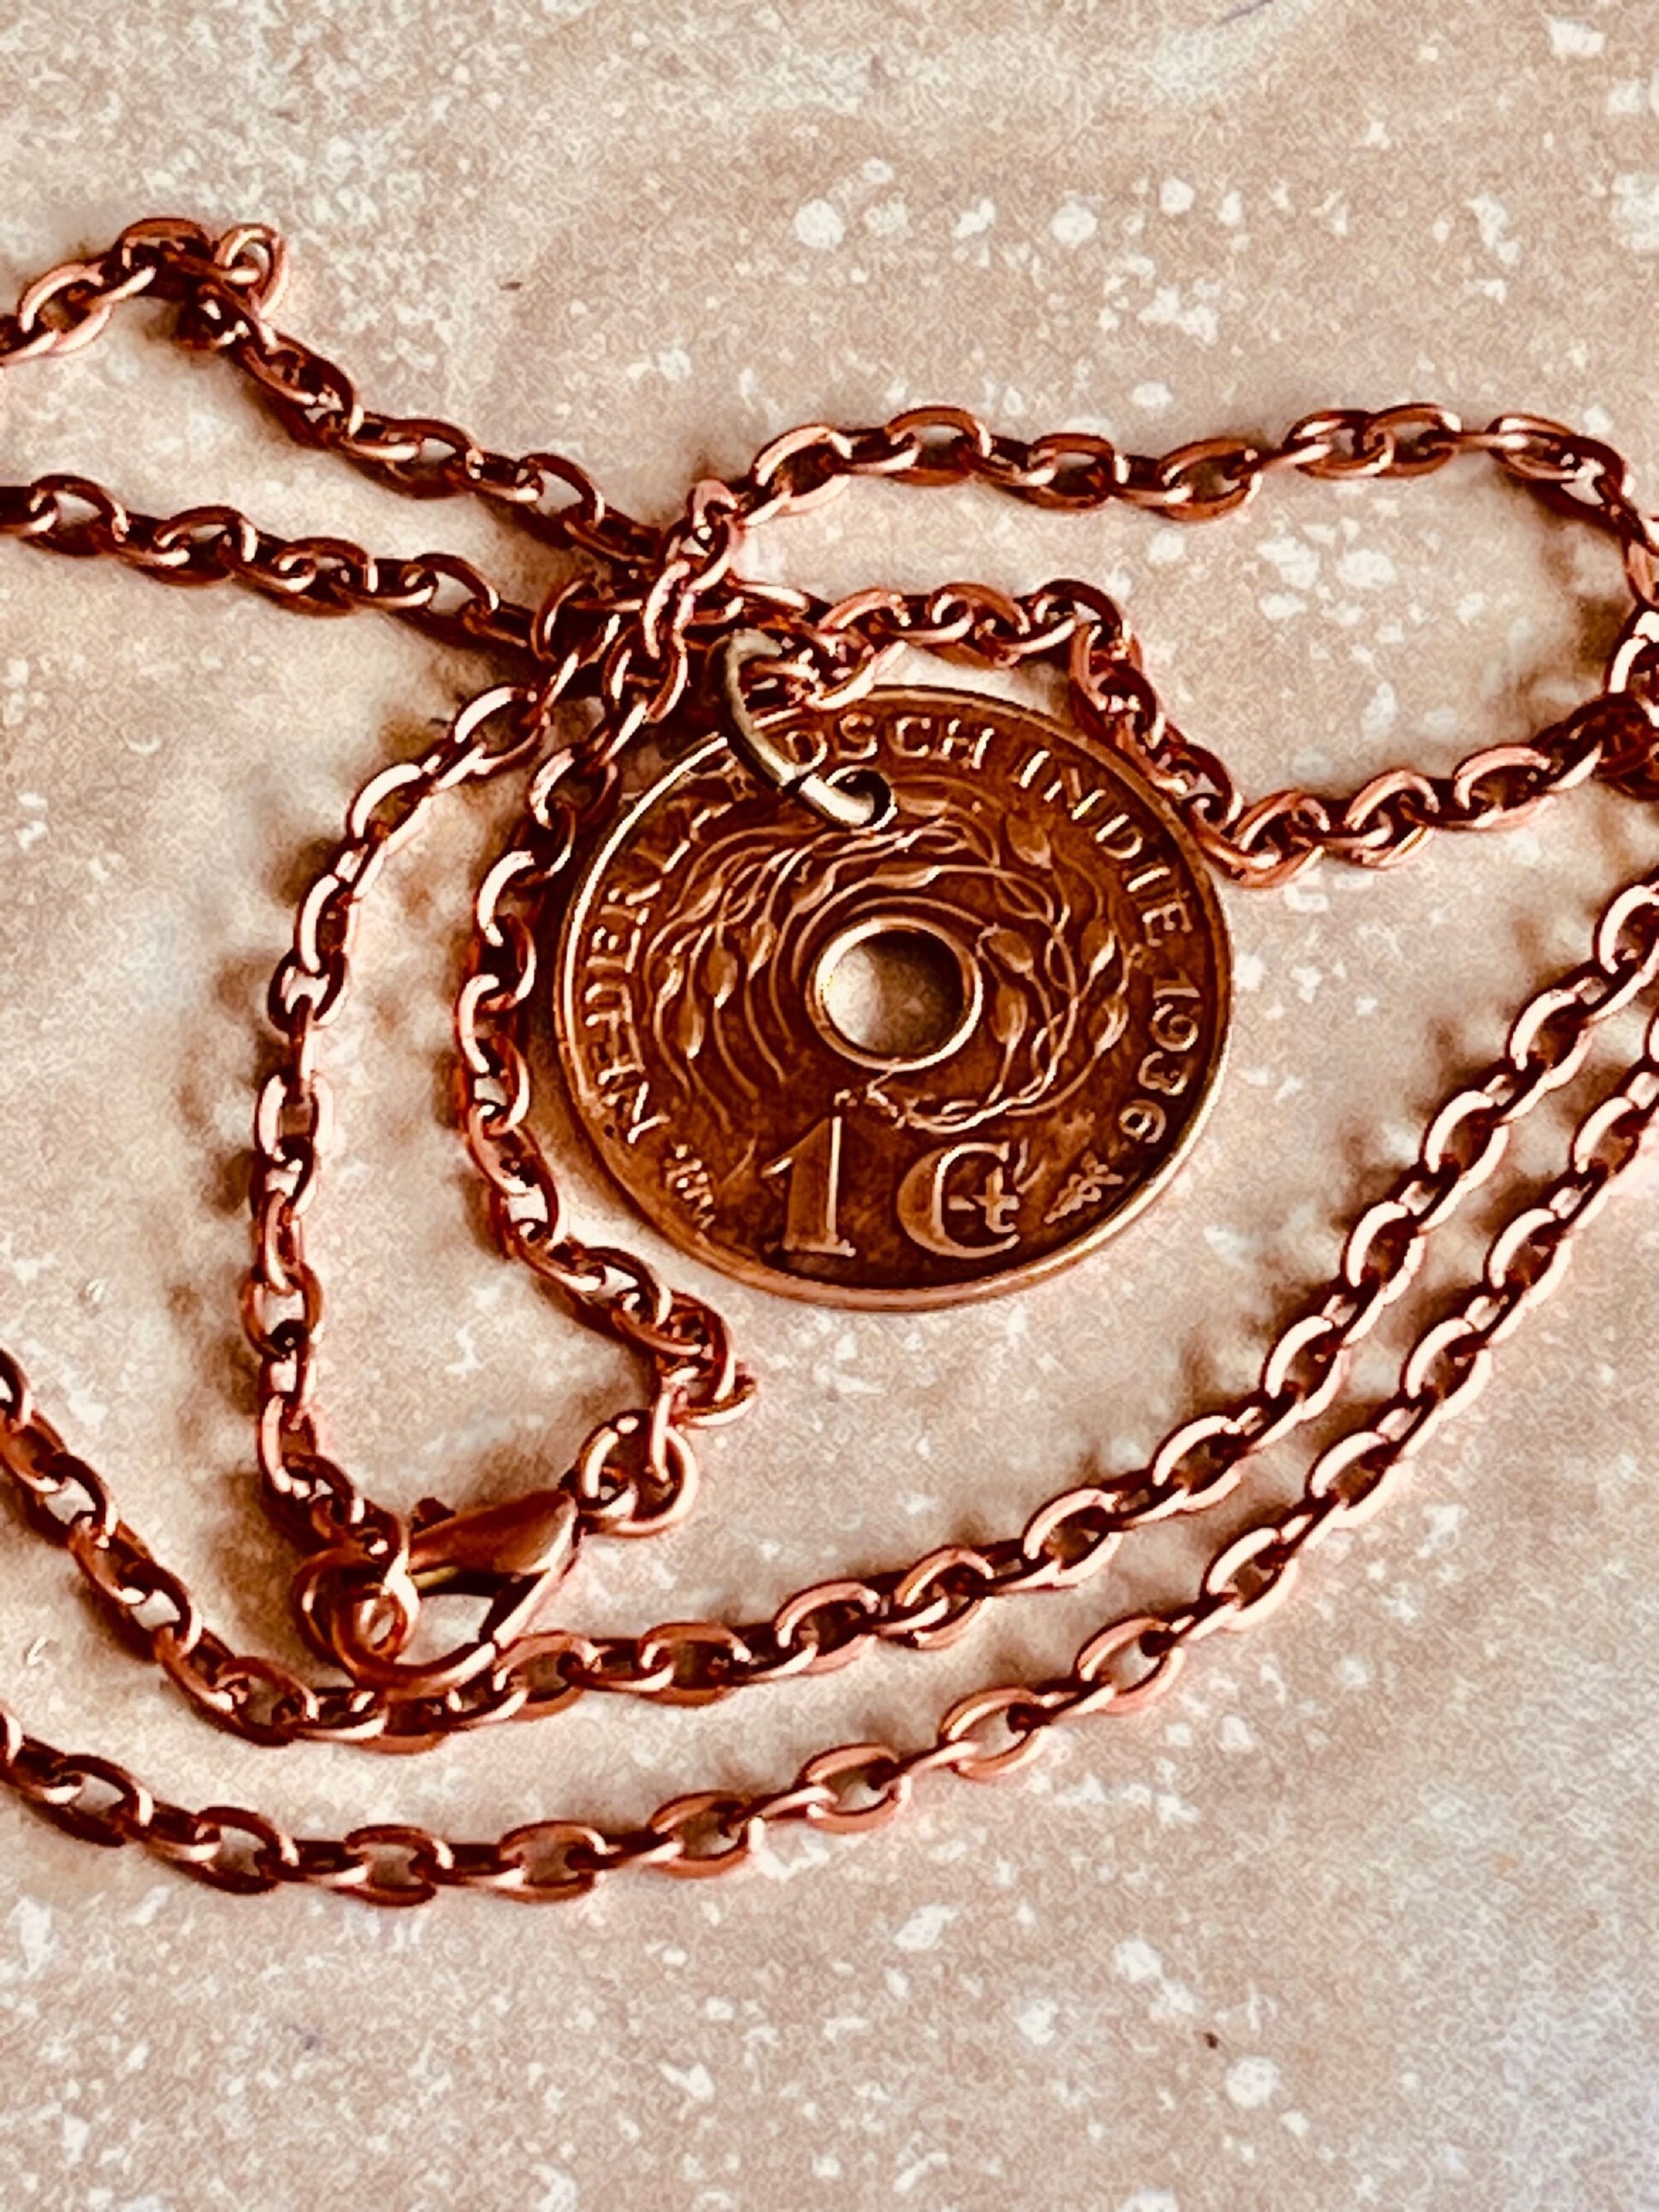 Netherlands Coin Necklace Indie 1 Cent Pendant Personal Old Vintage Handmade Jewelry Gift Friend Charm For Him Her World Coin Collector